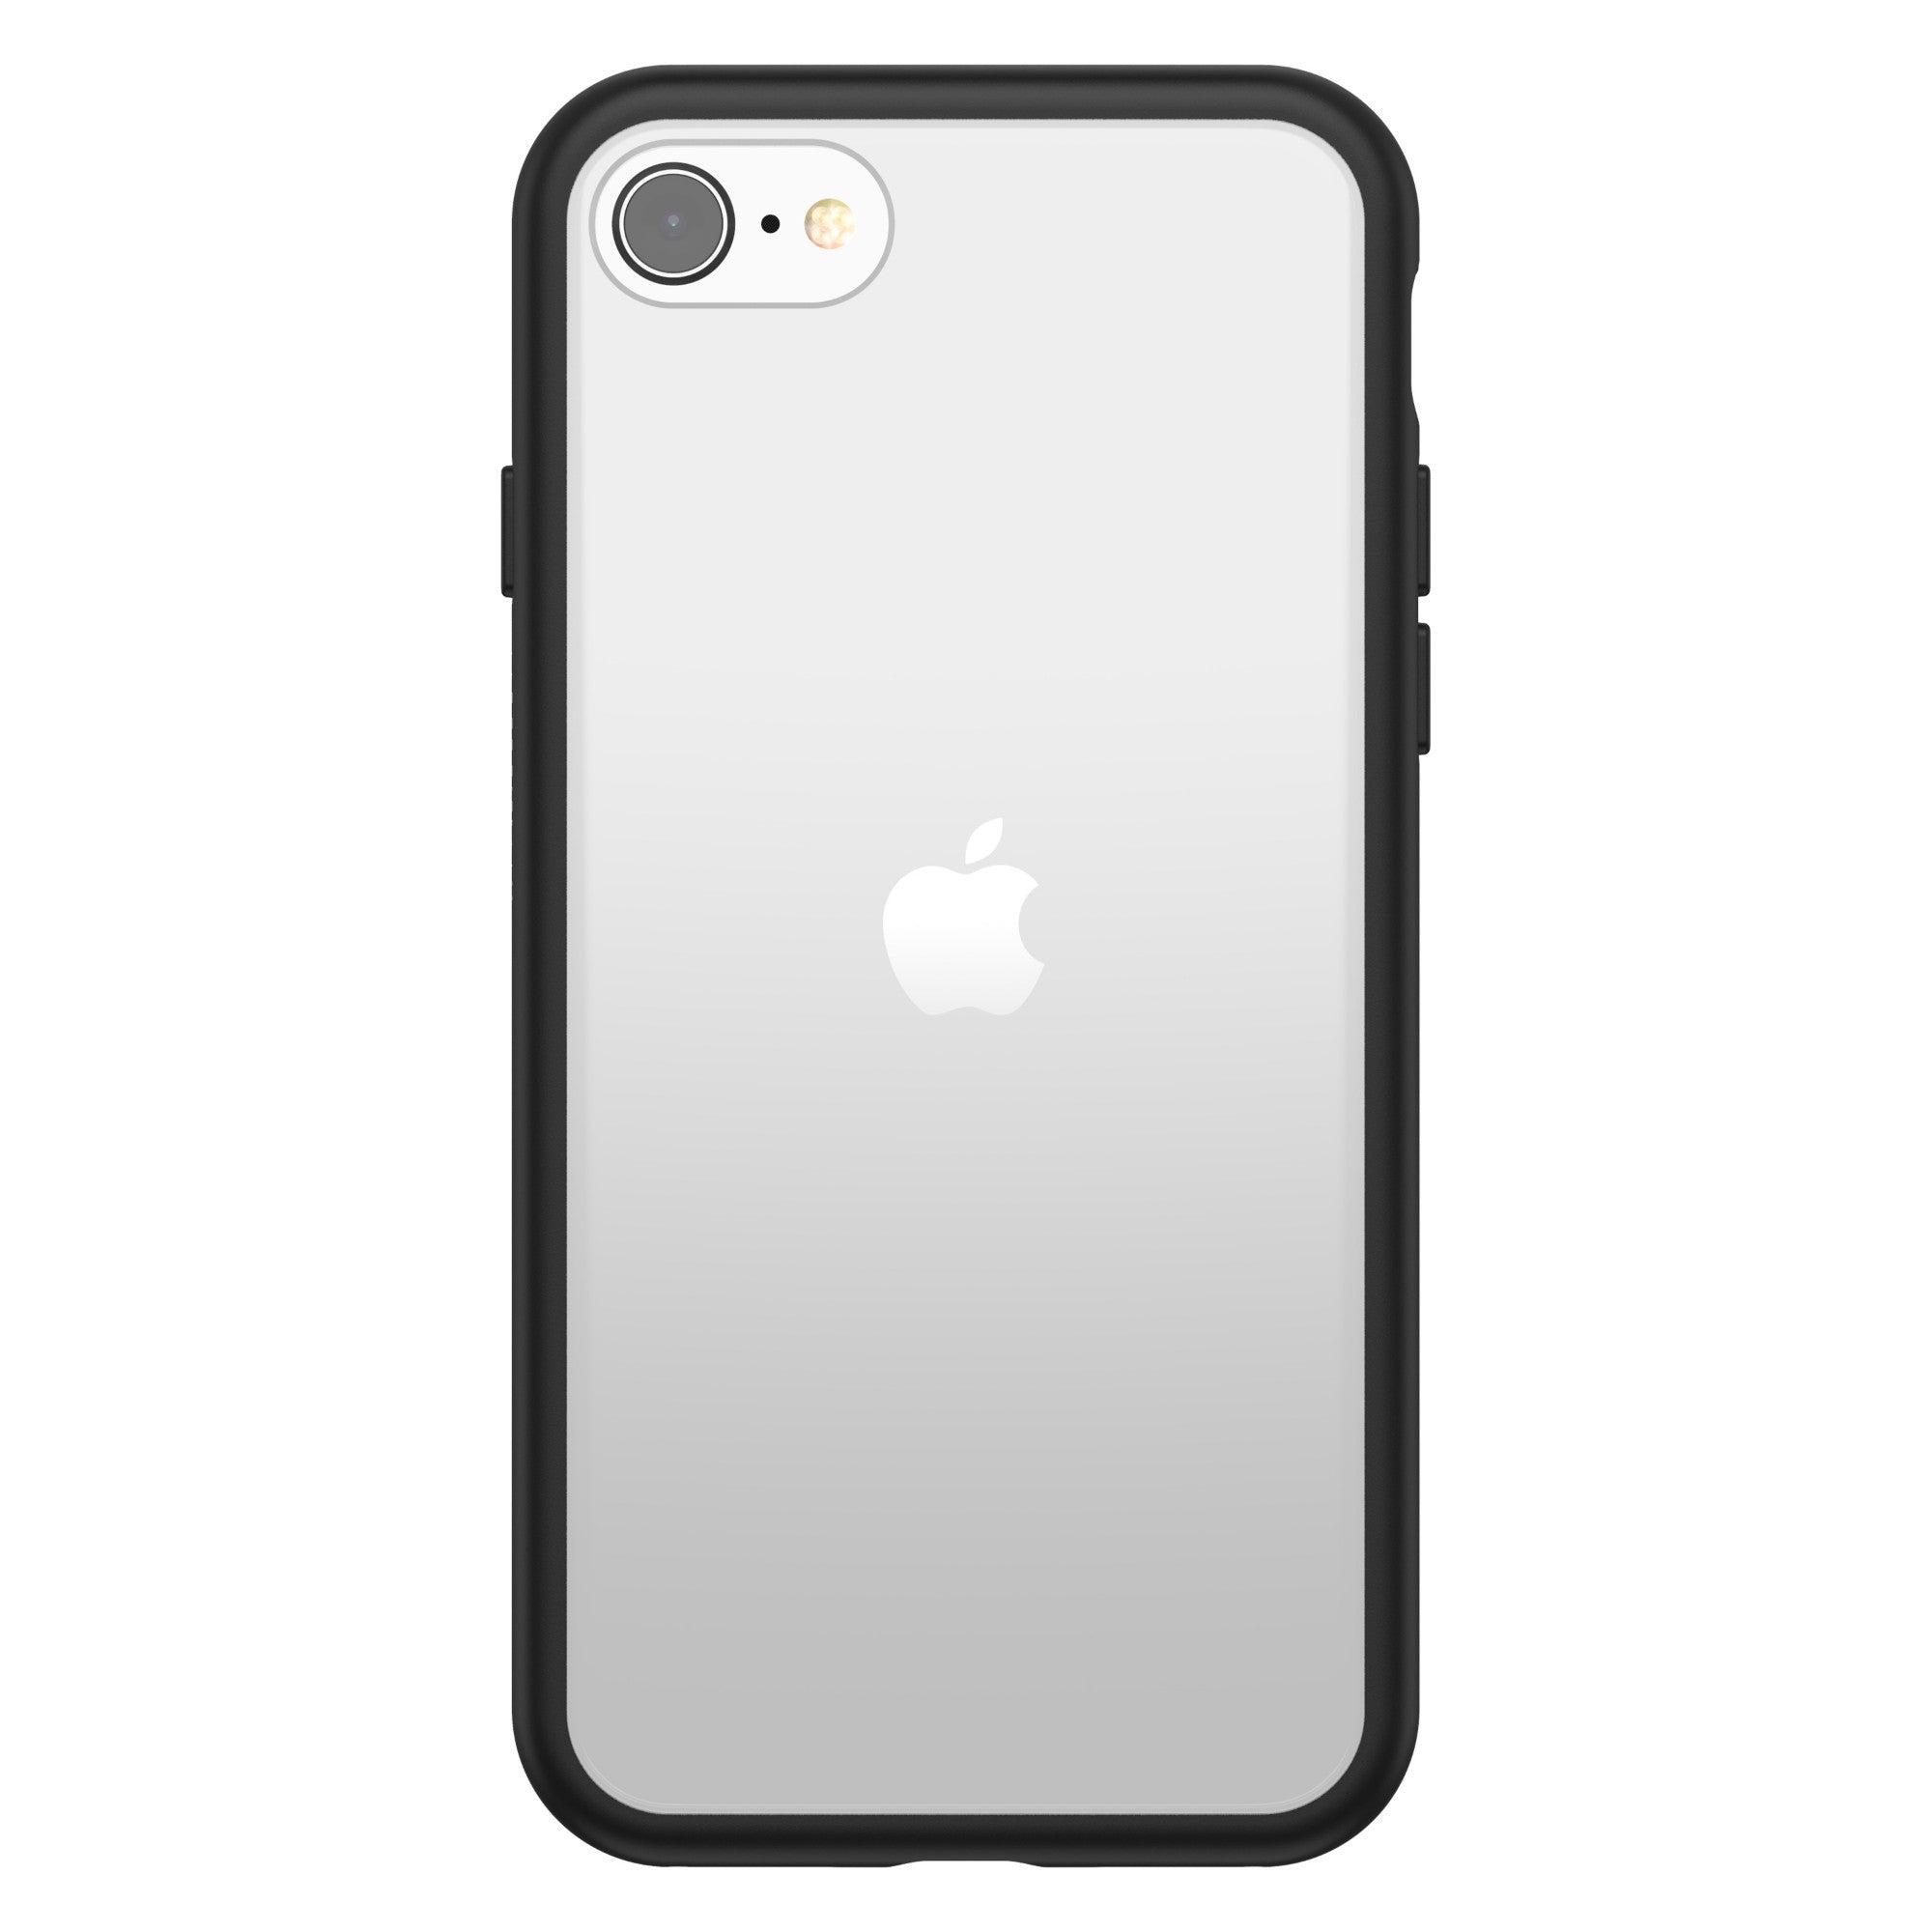 OtterBox React Series for Apple iPhone SE (2nd gen)/8/7, transparent/black - No retail packaging